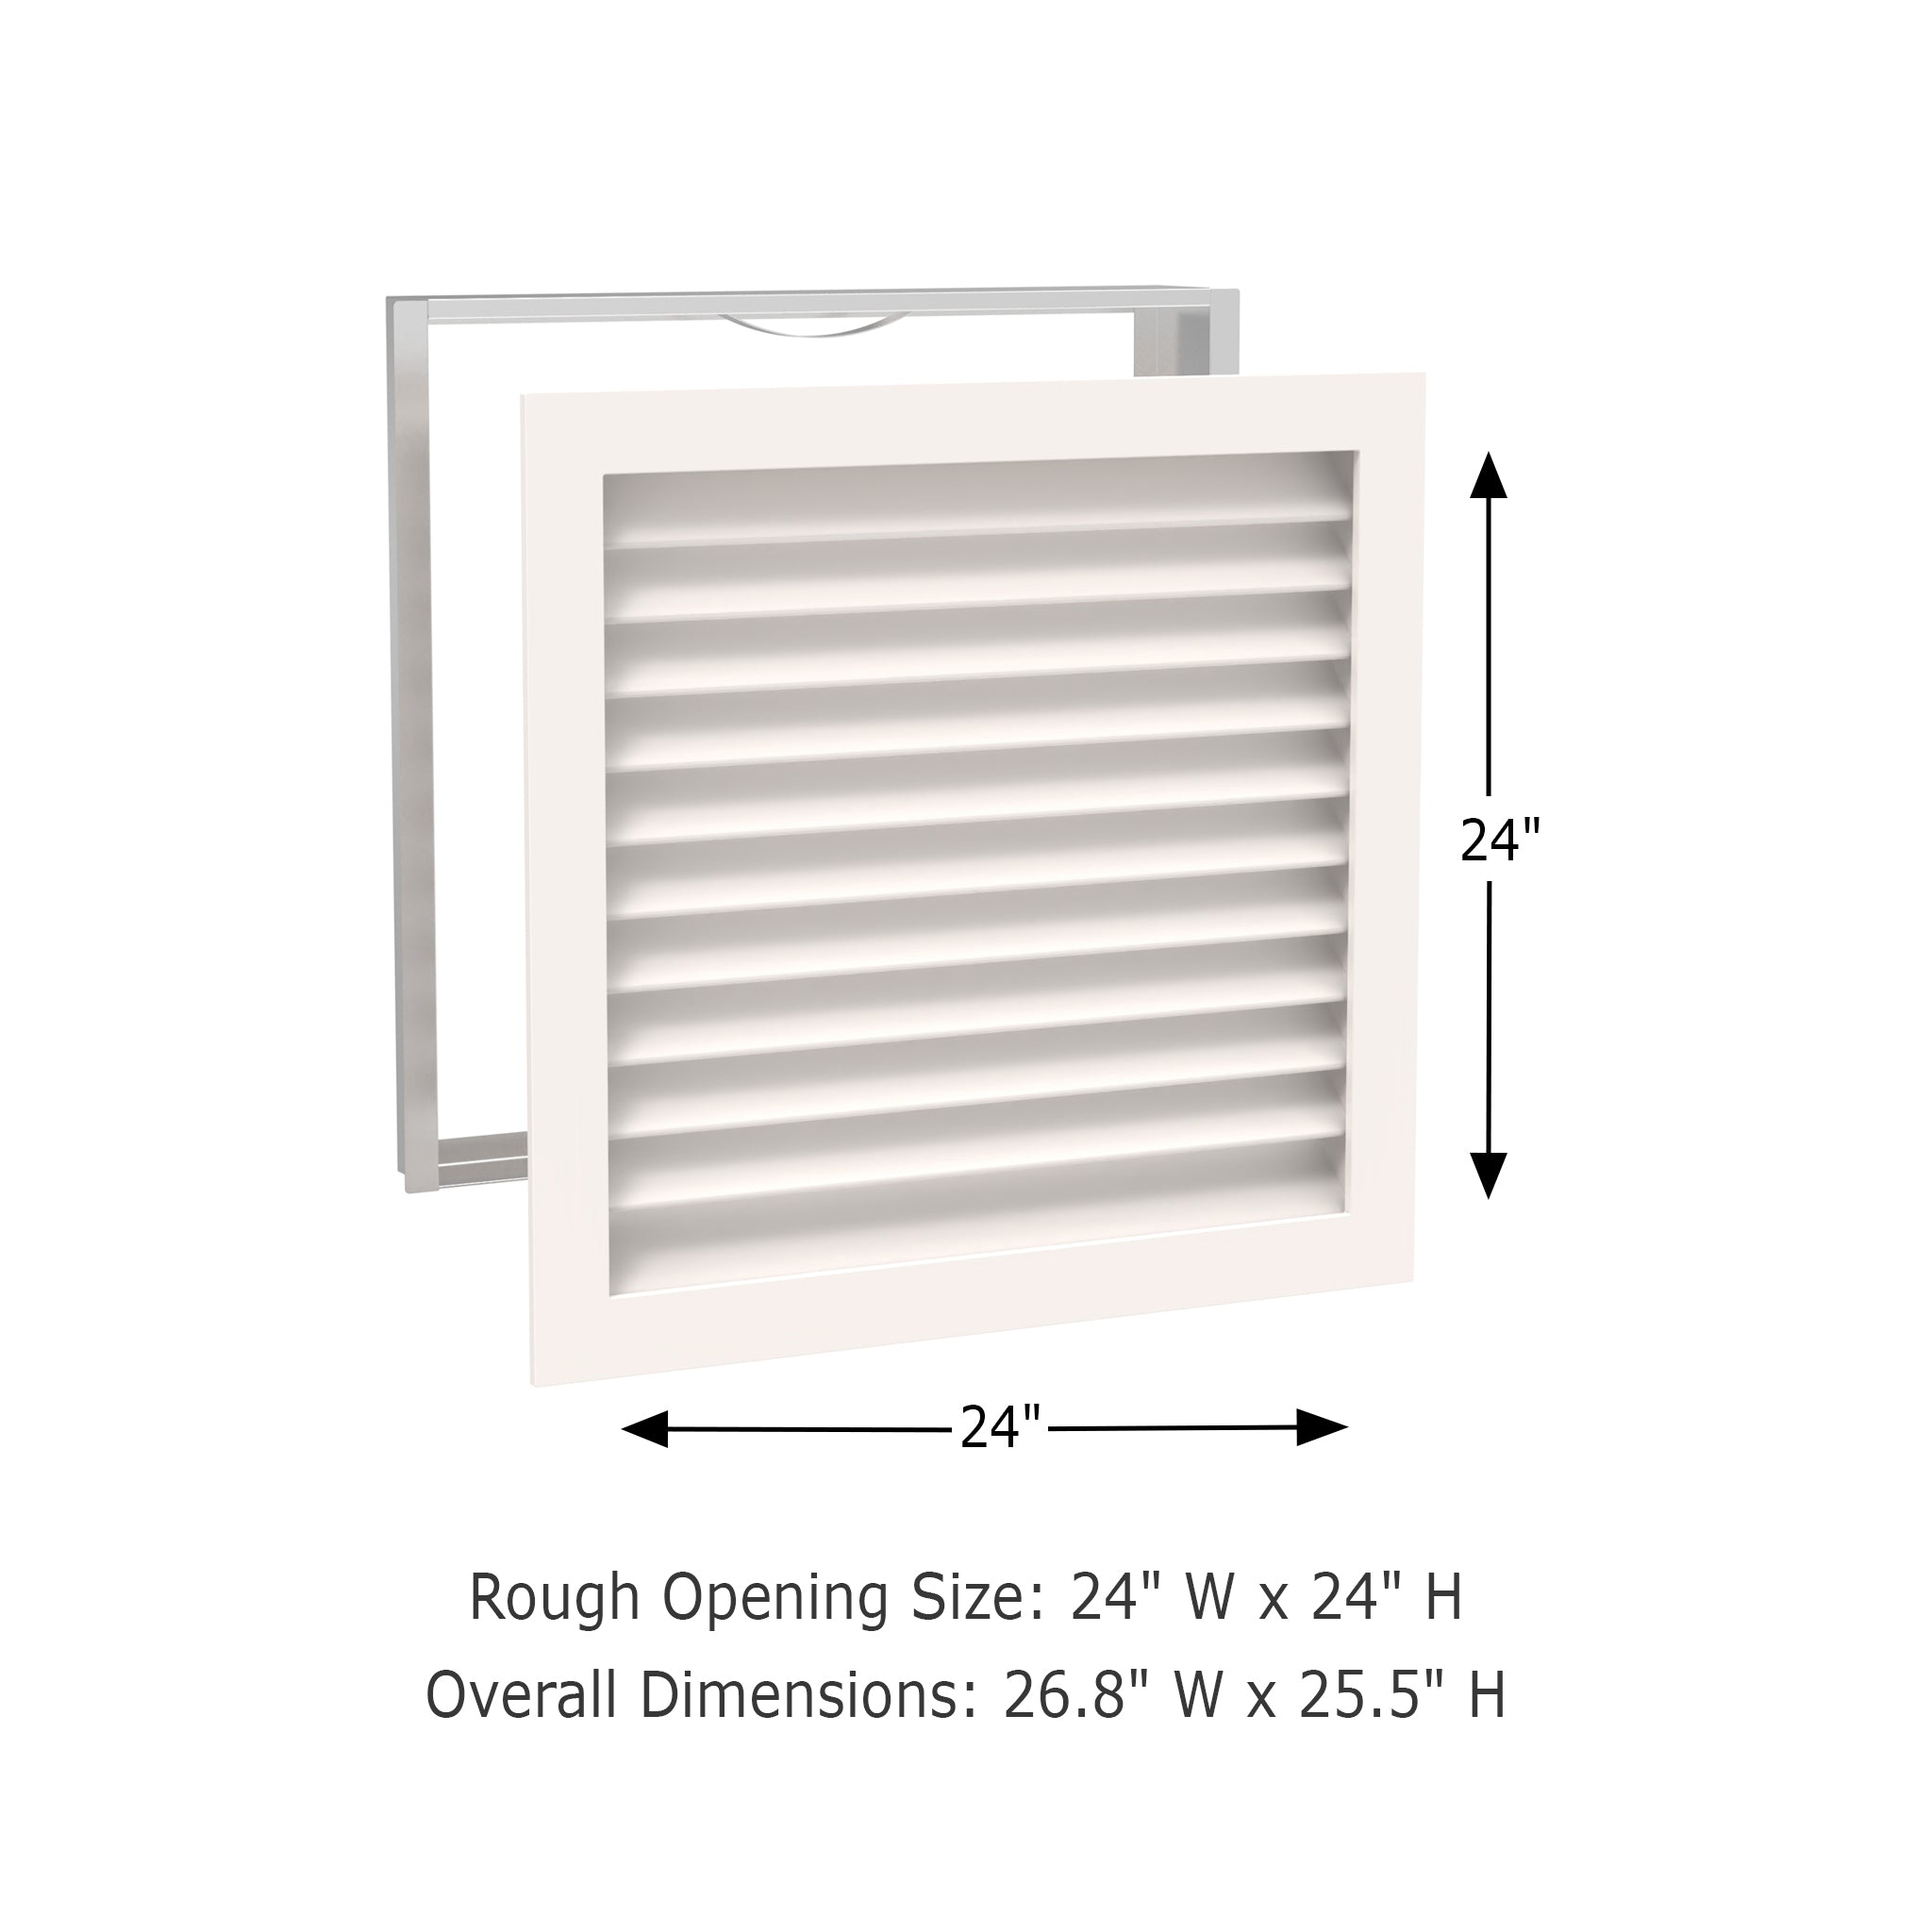 Worth Home Products - decorative wood AC vent covers luxury return vent - Primed Wood Louvers 24x24